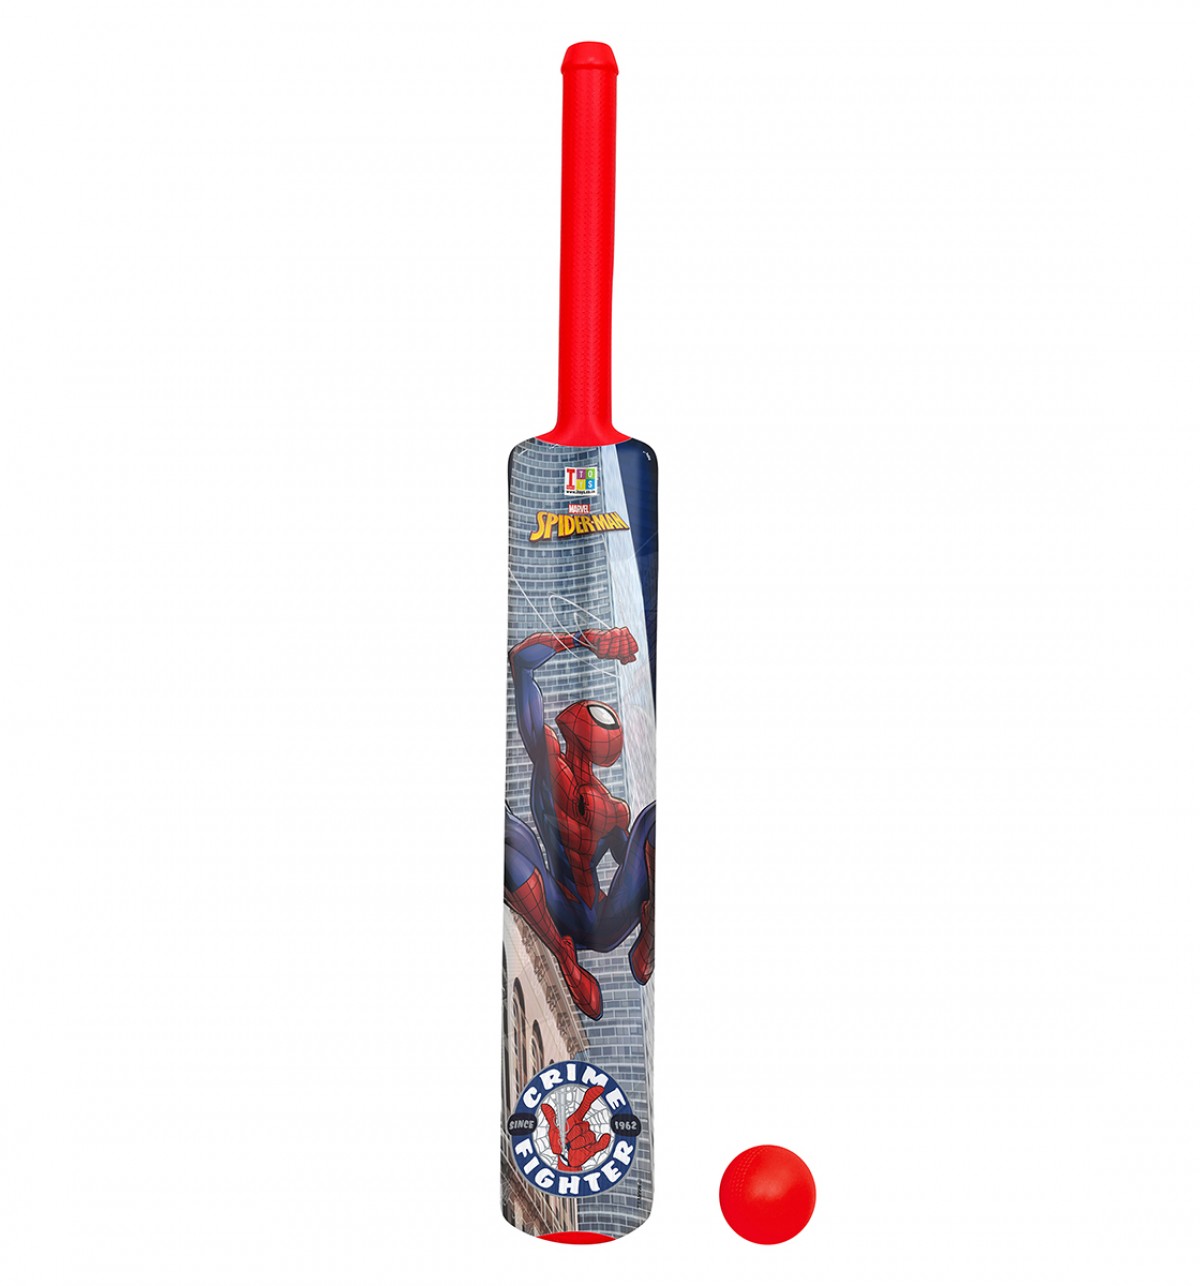 IToys Marvel Spiderman Bat & ball set for kids (Size.4),  3Y+(Multicolour)